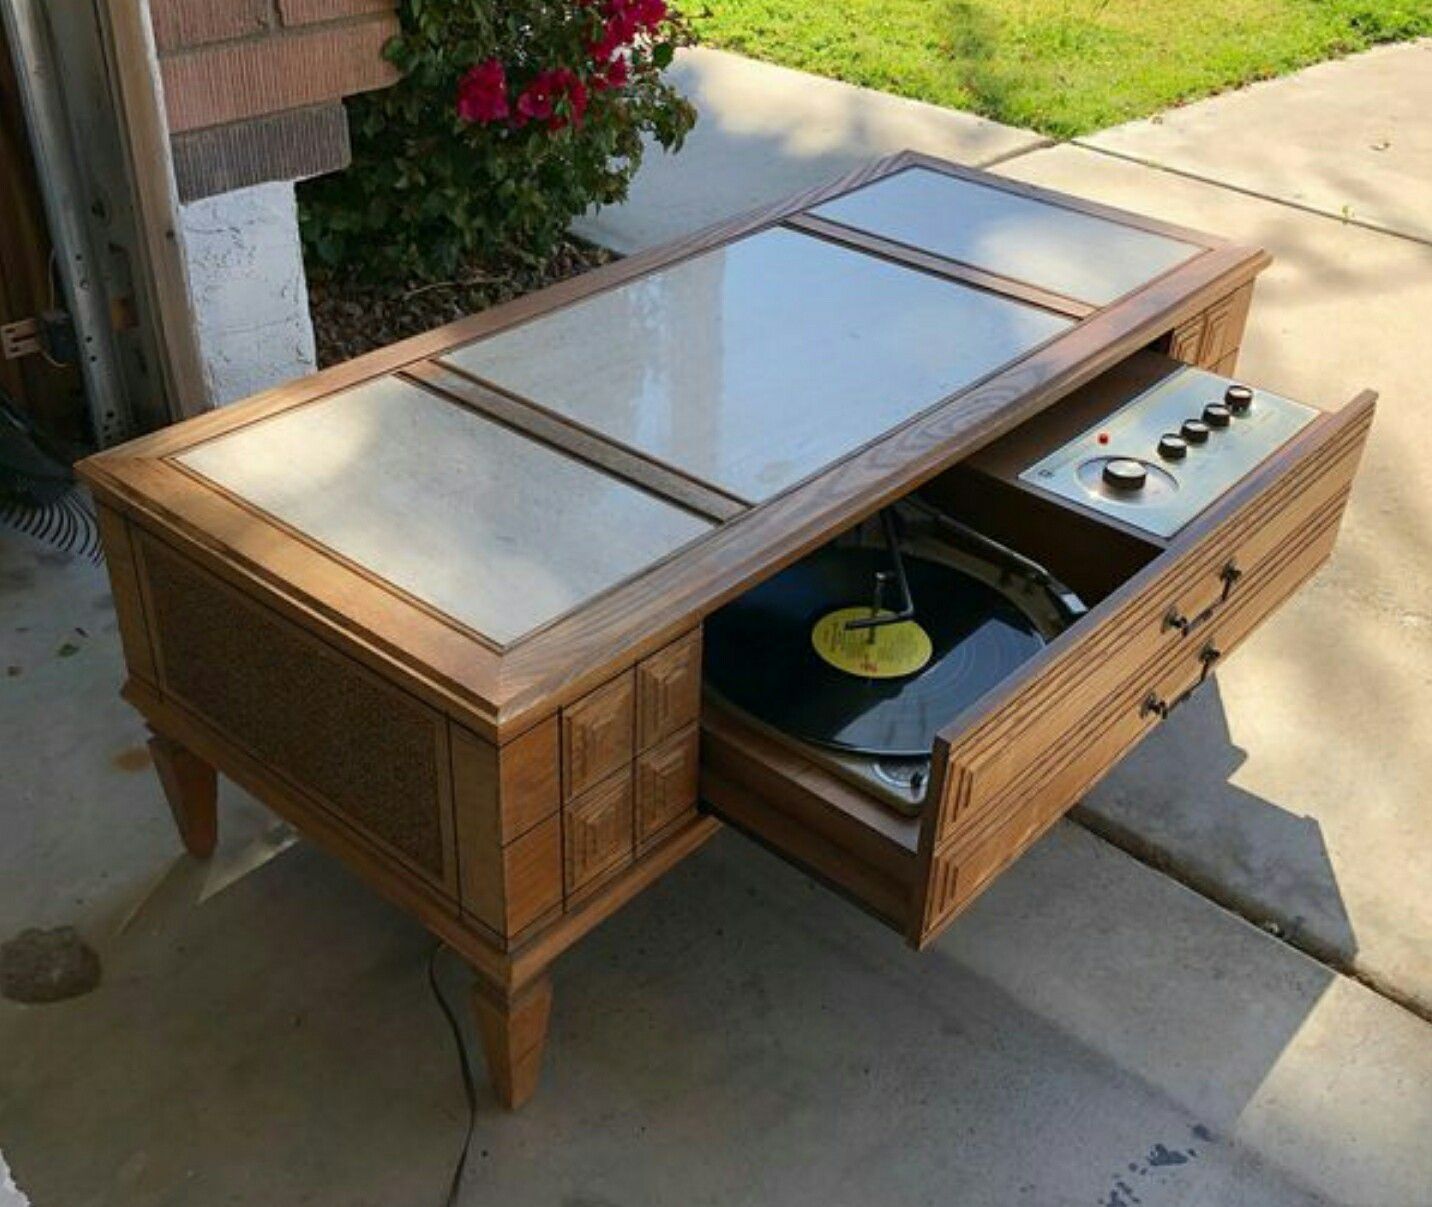 Vintage mid century record player stereo am fm radio coffee table